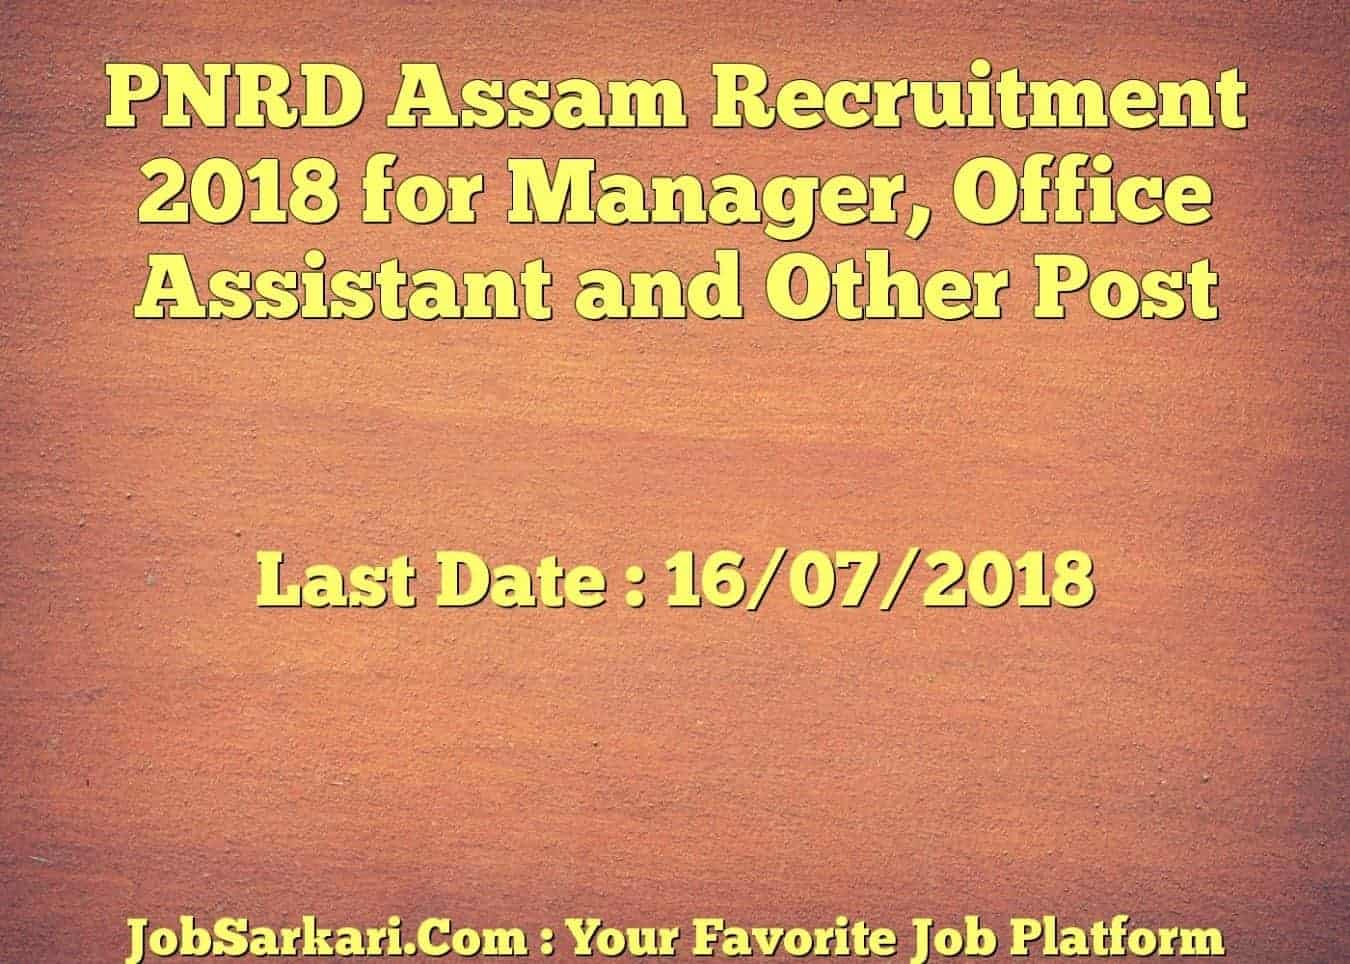 PNRD Assam Recruitment 2018 for Manager, Office Assistant and Other Post